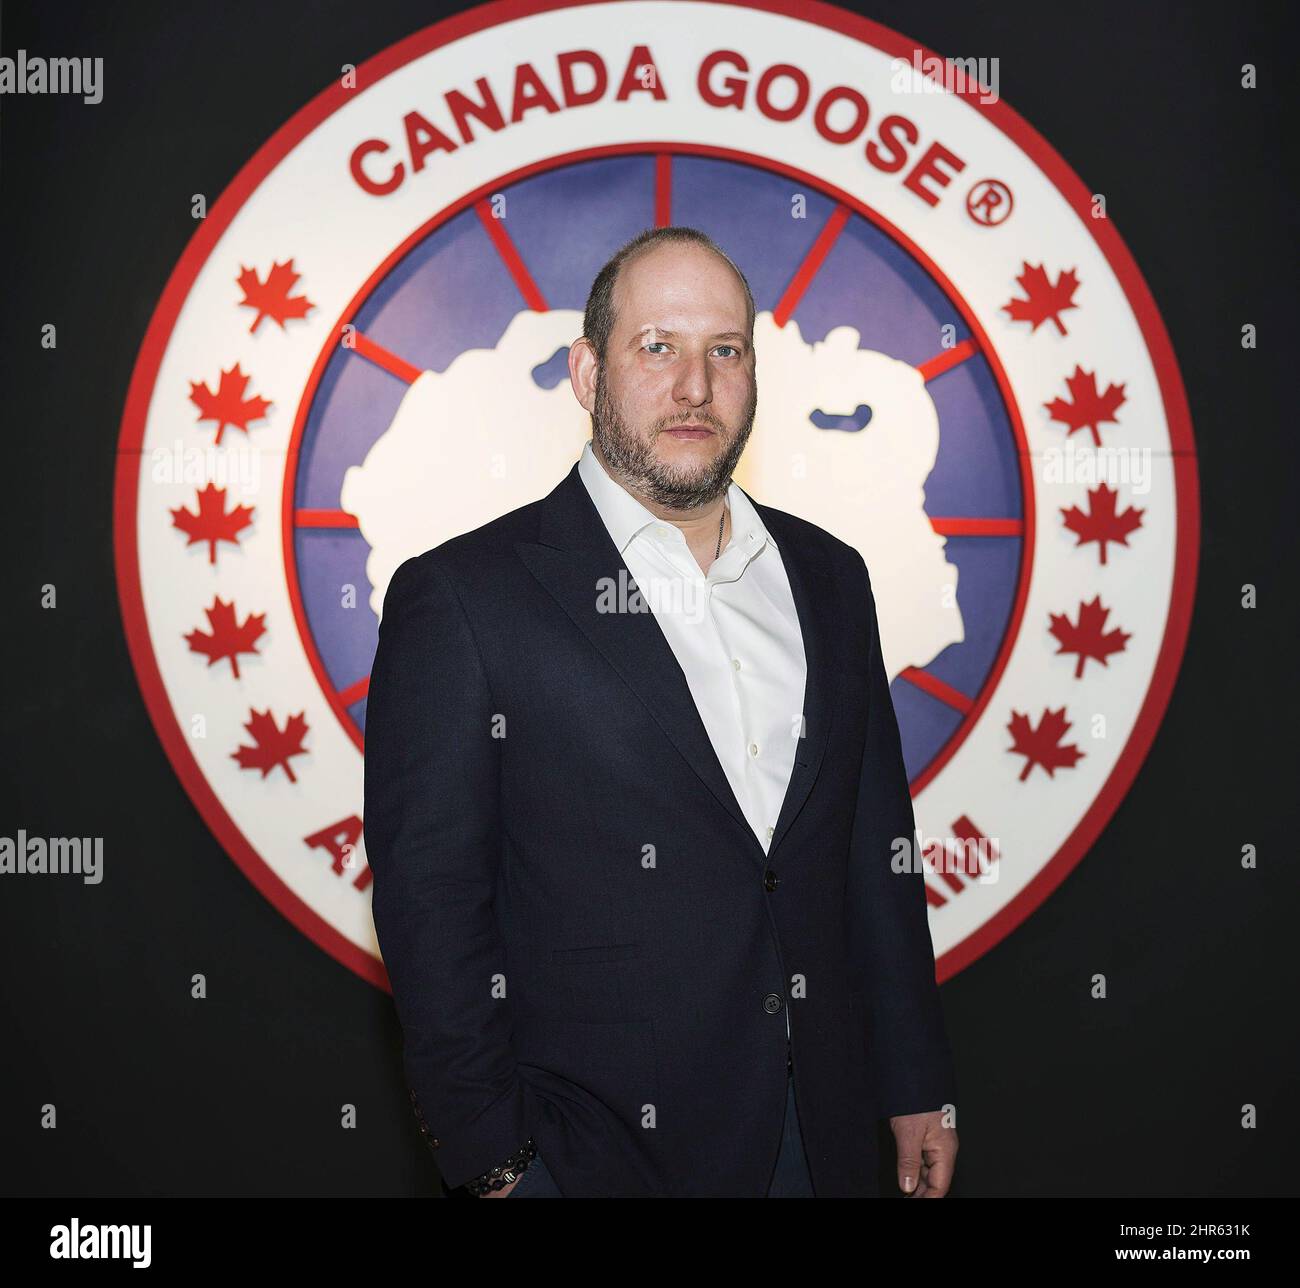 Dani Reiss, president and CEO of Canada Goose Inc. stands for a portrait at  his office showroom in Toronto on Thursday, November 28, 2013. The head of Canada  Goose is setting his